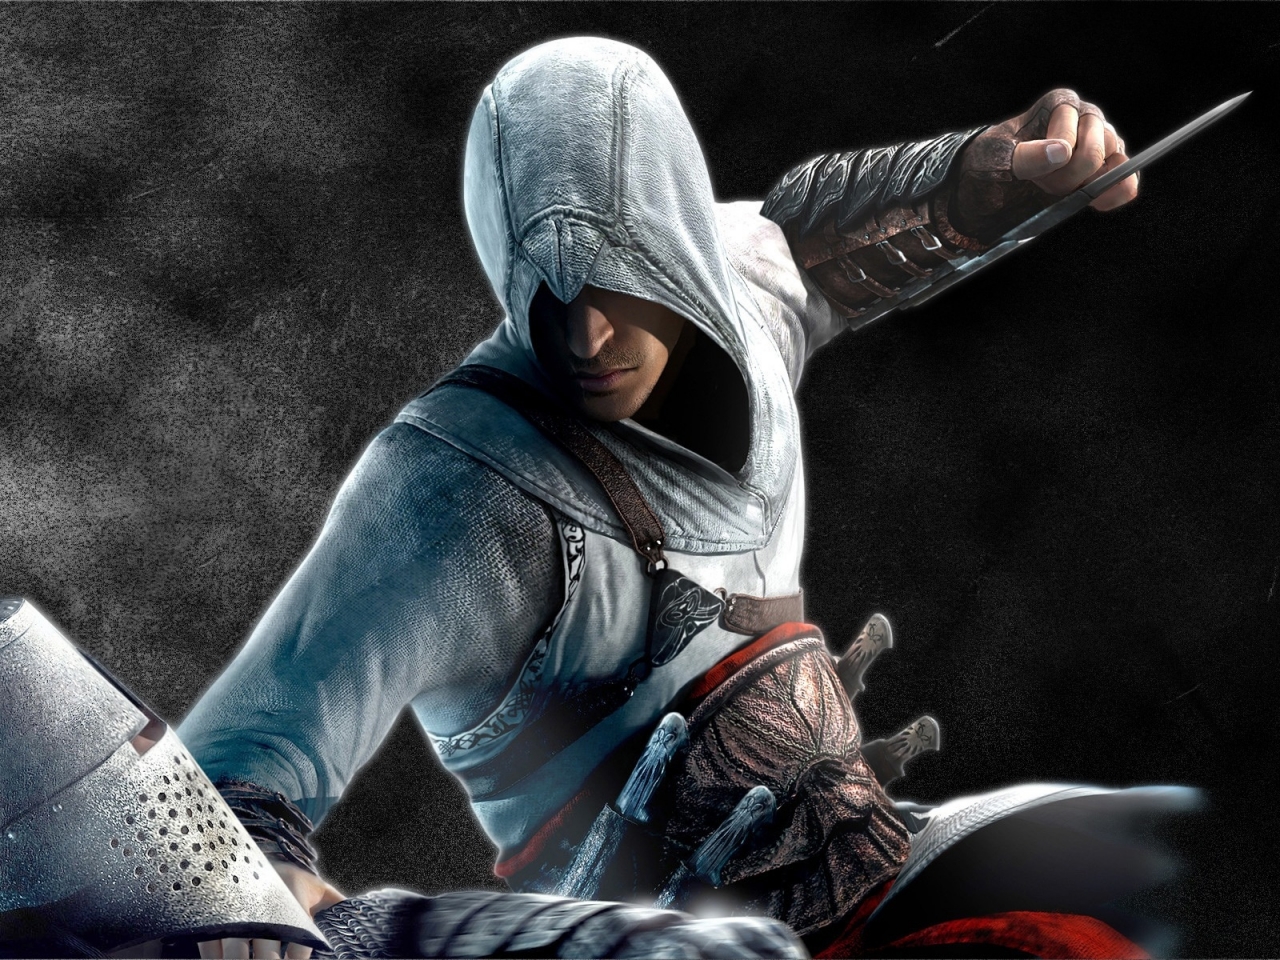 Assassin Creed for 1280 x 960 resolution